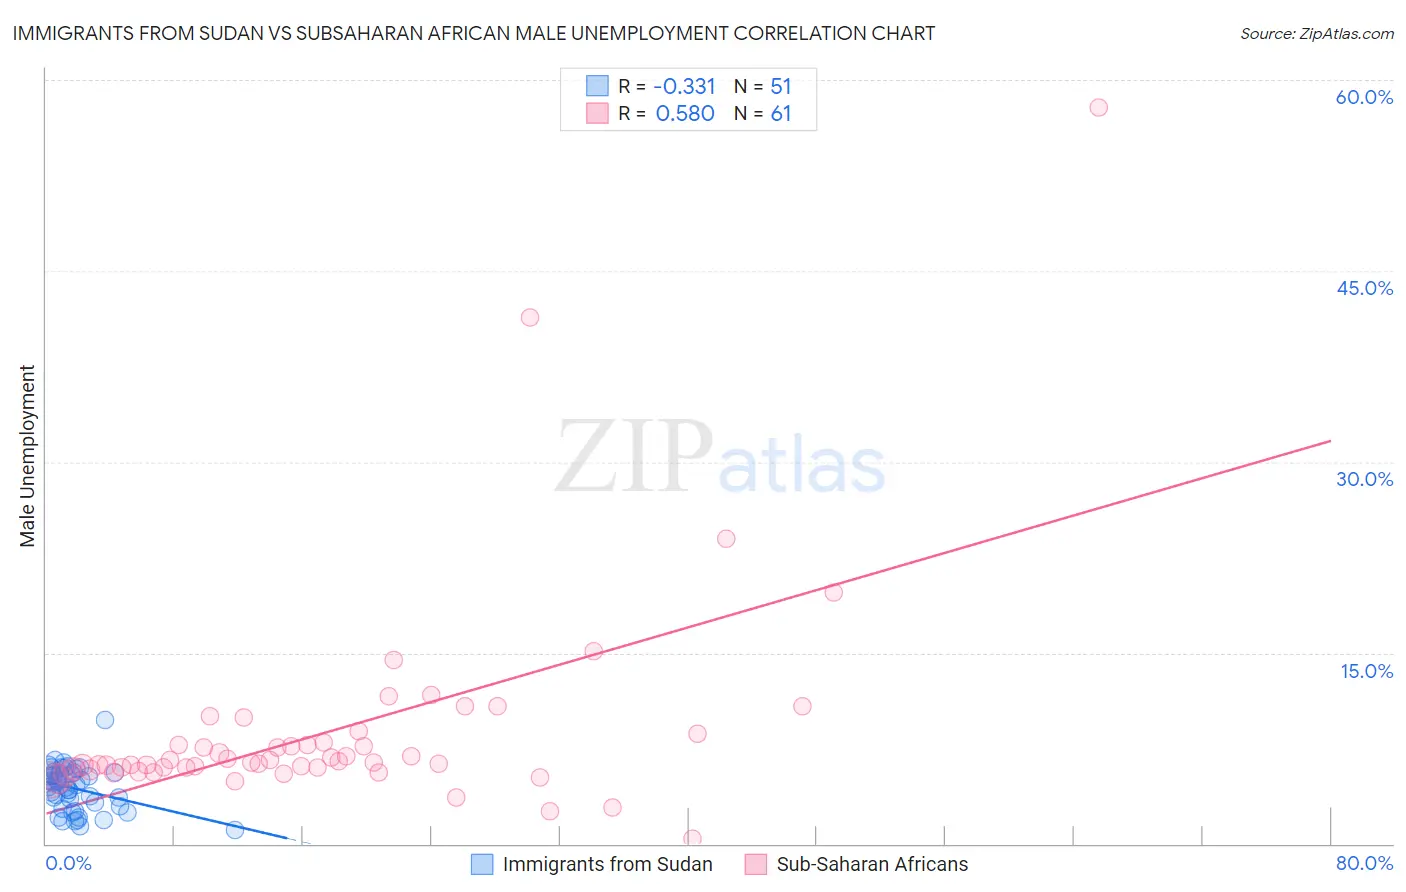 Immigrants from Sudan vs Subsaharan African Male Unemployment